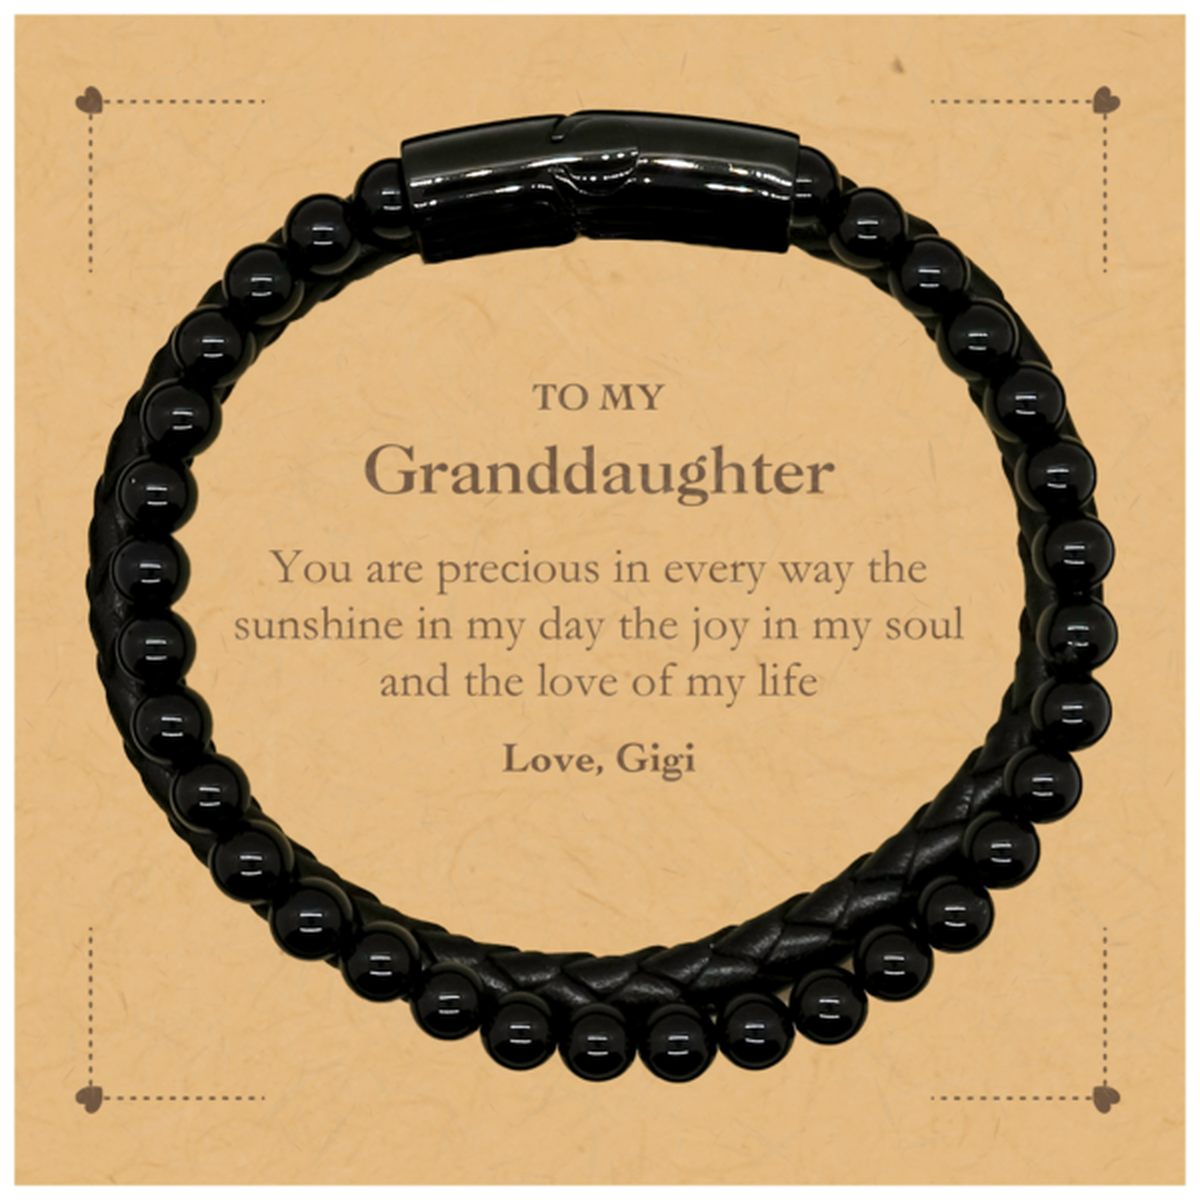 Graduation Gifts for Granddaughter Stone Leather Bracelets Present from Gigi, Christmas Granddaughter Birthday Gifts Granddaughter You are precious in every way the sunshine in my day. Love, Gigi